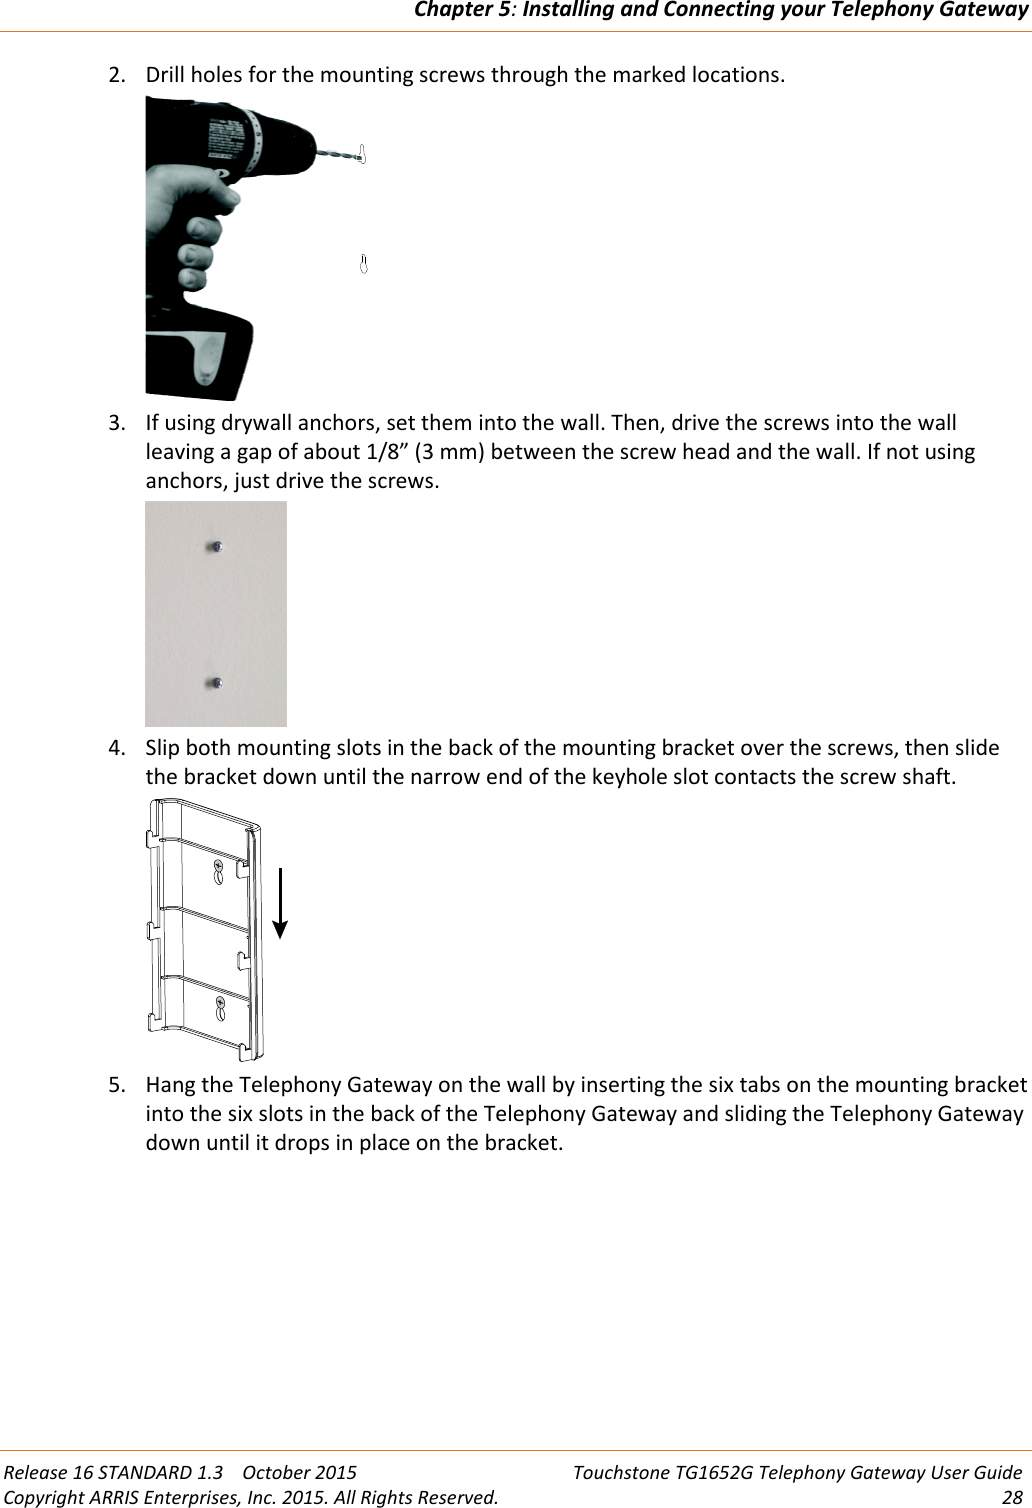 Chapter 5:Installing and Connecting your Telephony GatewayRelease 16 STANDARD 1.3 October 2015 Touchstone TG1652G Telephony Gateway User GuideCopyright ARRIS Enterprises, Inc. 2015. All Rights Reserved. 282. Drill holes for the mounting screws through the marked locations.3. If using drywall anchors, set them into the wall. Then, drive the screws into the wallleaving a gap of about 1/8” (3 mm) between the screw head and the wall. If not usinganchors, just drive the screws.4. Slip both mounting slots in the back of the mounting bracket over the screws, then slidethe bracket down until the narrow end of the keyhole slot contacts the screw shaft.5. Hang the Telephony Gateway on the wall by inserting the six tabs on the mounting bracketinto the six slots in the back of the Telephony Gateway and sliding the Telephony Gatewaydown until it drops in place on the bracket.